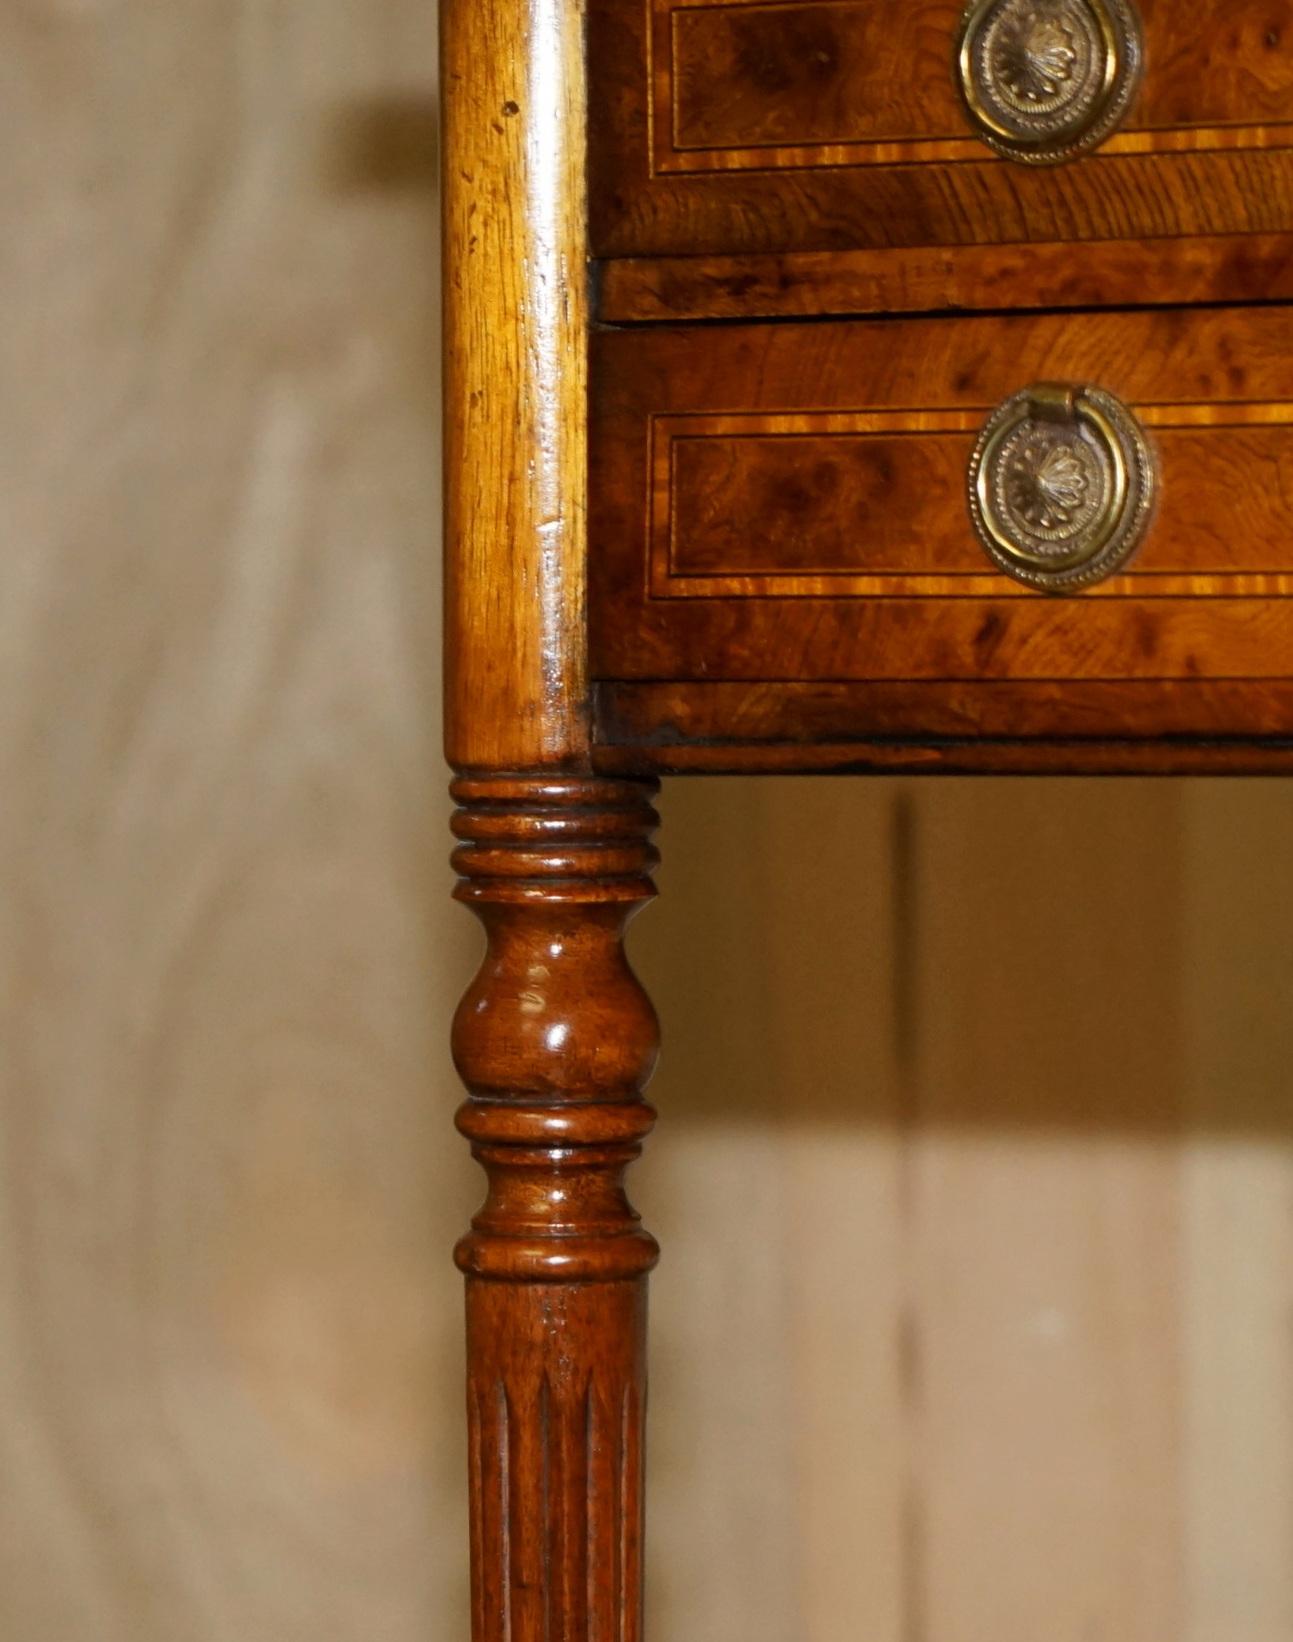 Elm EXQUISITE CIRCA 1920 BURR ELM & SATiNWOOD FRENCH POLISHED RESTORED CONSOLE TABLE For Sale